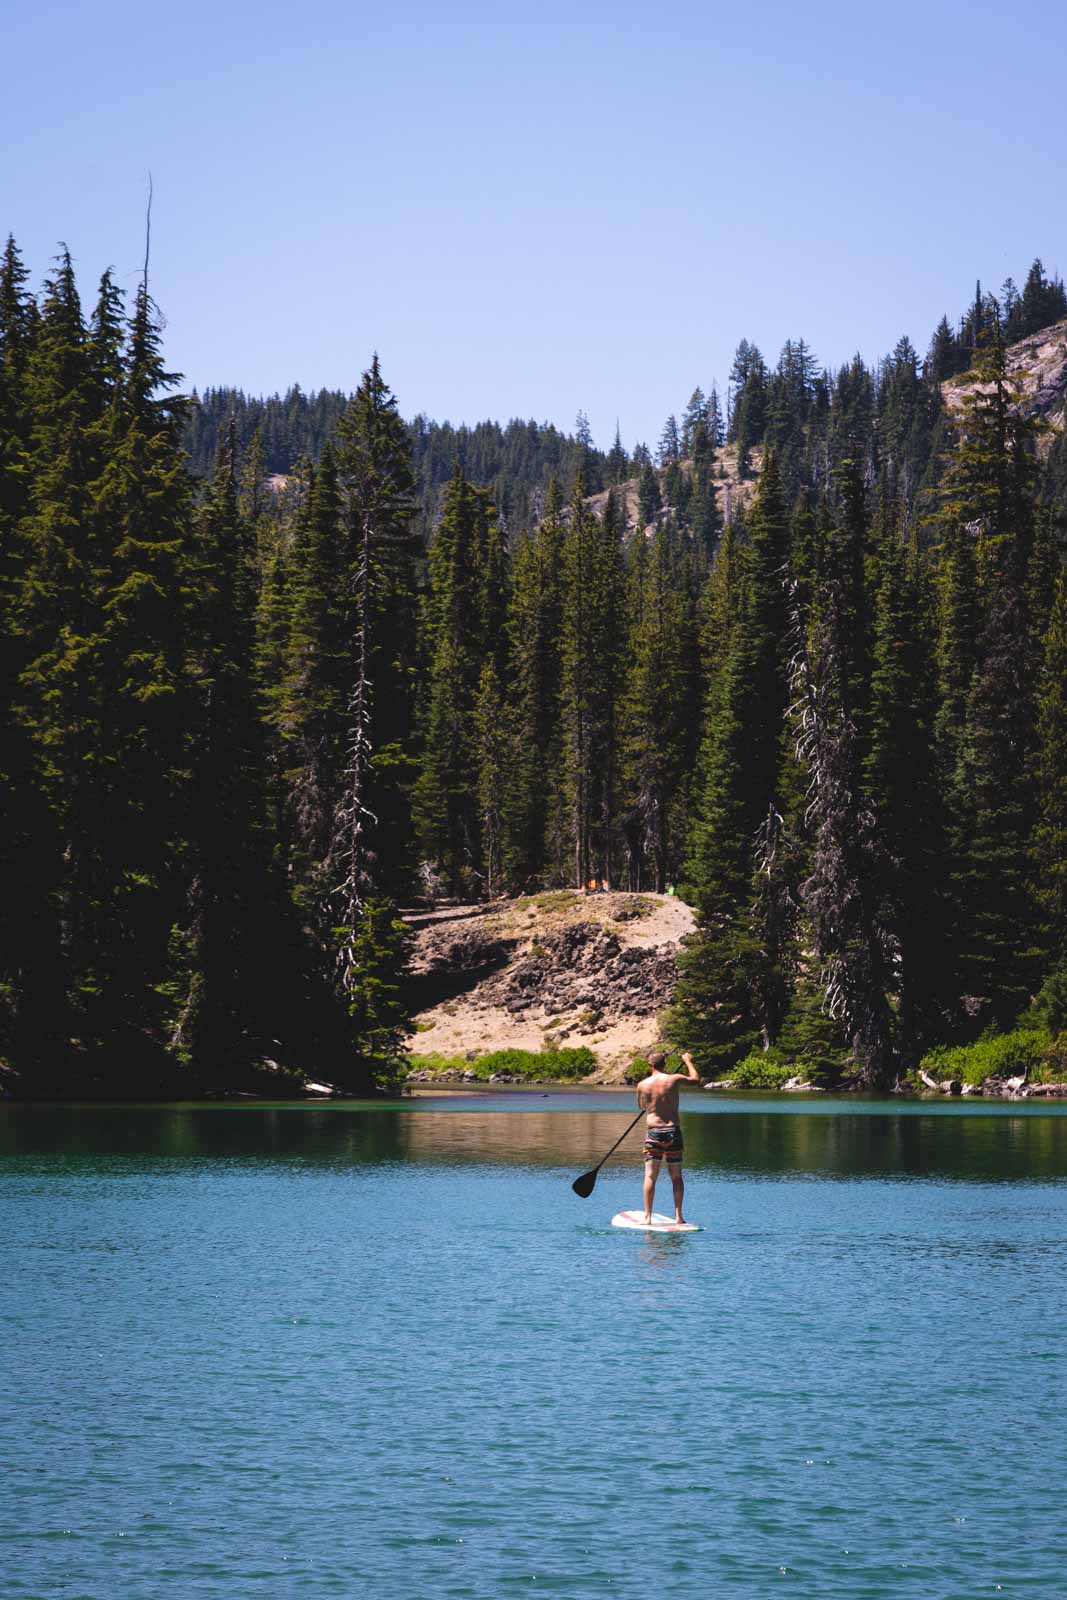 Paddle boarding is a fun activity to do in Devils Lake near Cascade Lakes.